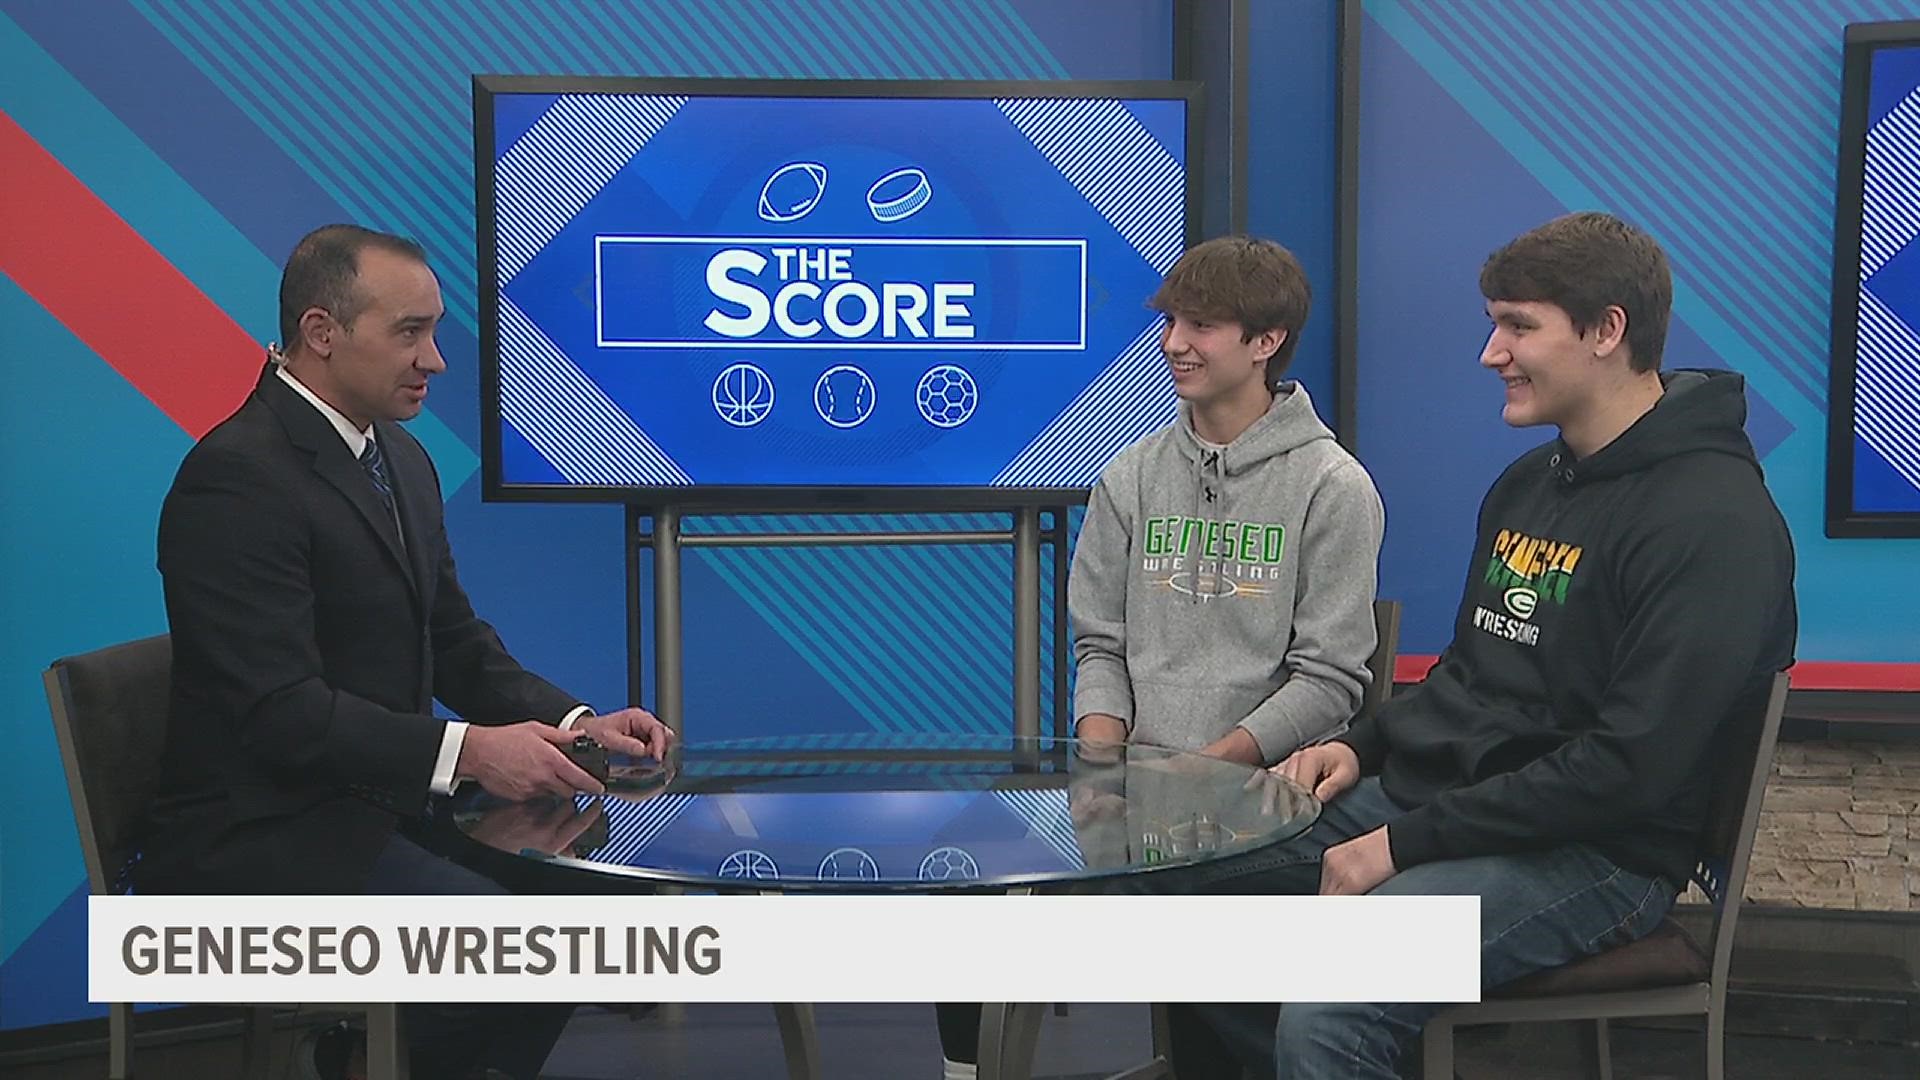 Geneseo Wrestlers are undefeated in the Western Big 6, closing in on another Conference Championship.